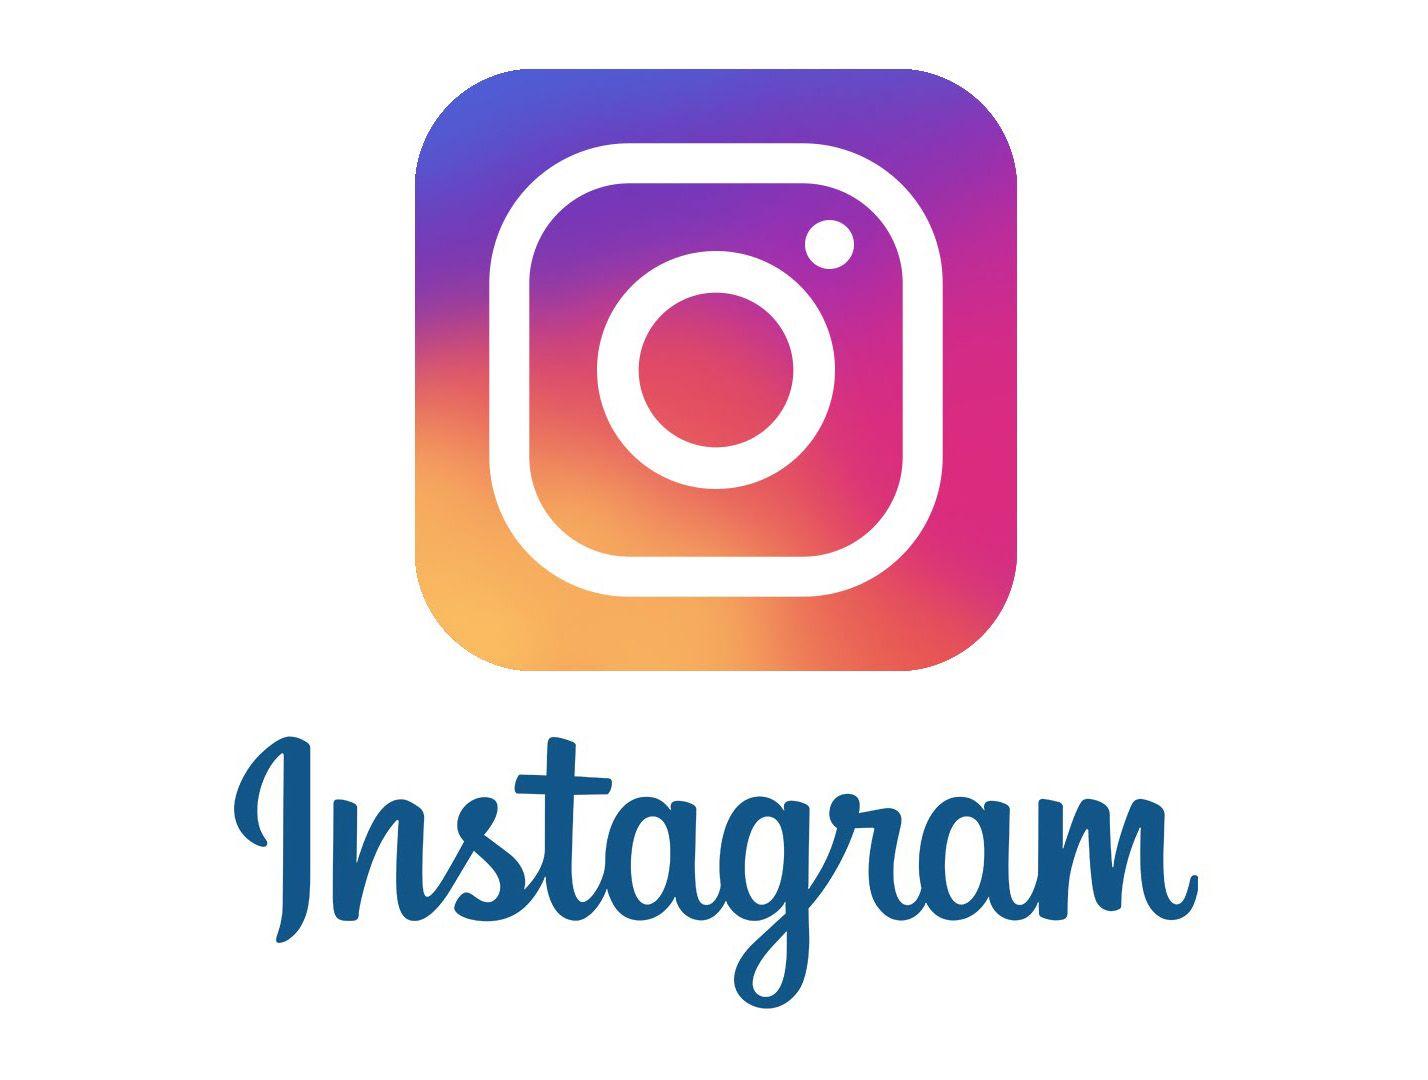 Instgram Logo - Instagram Logo, Instagram Symbol Meaning, History and Evolution